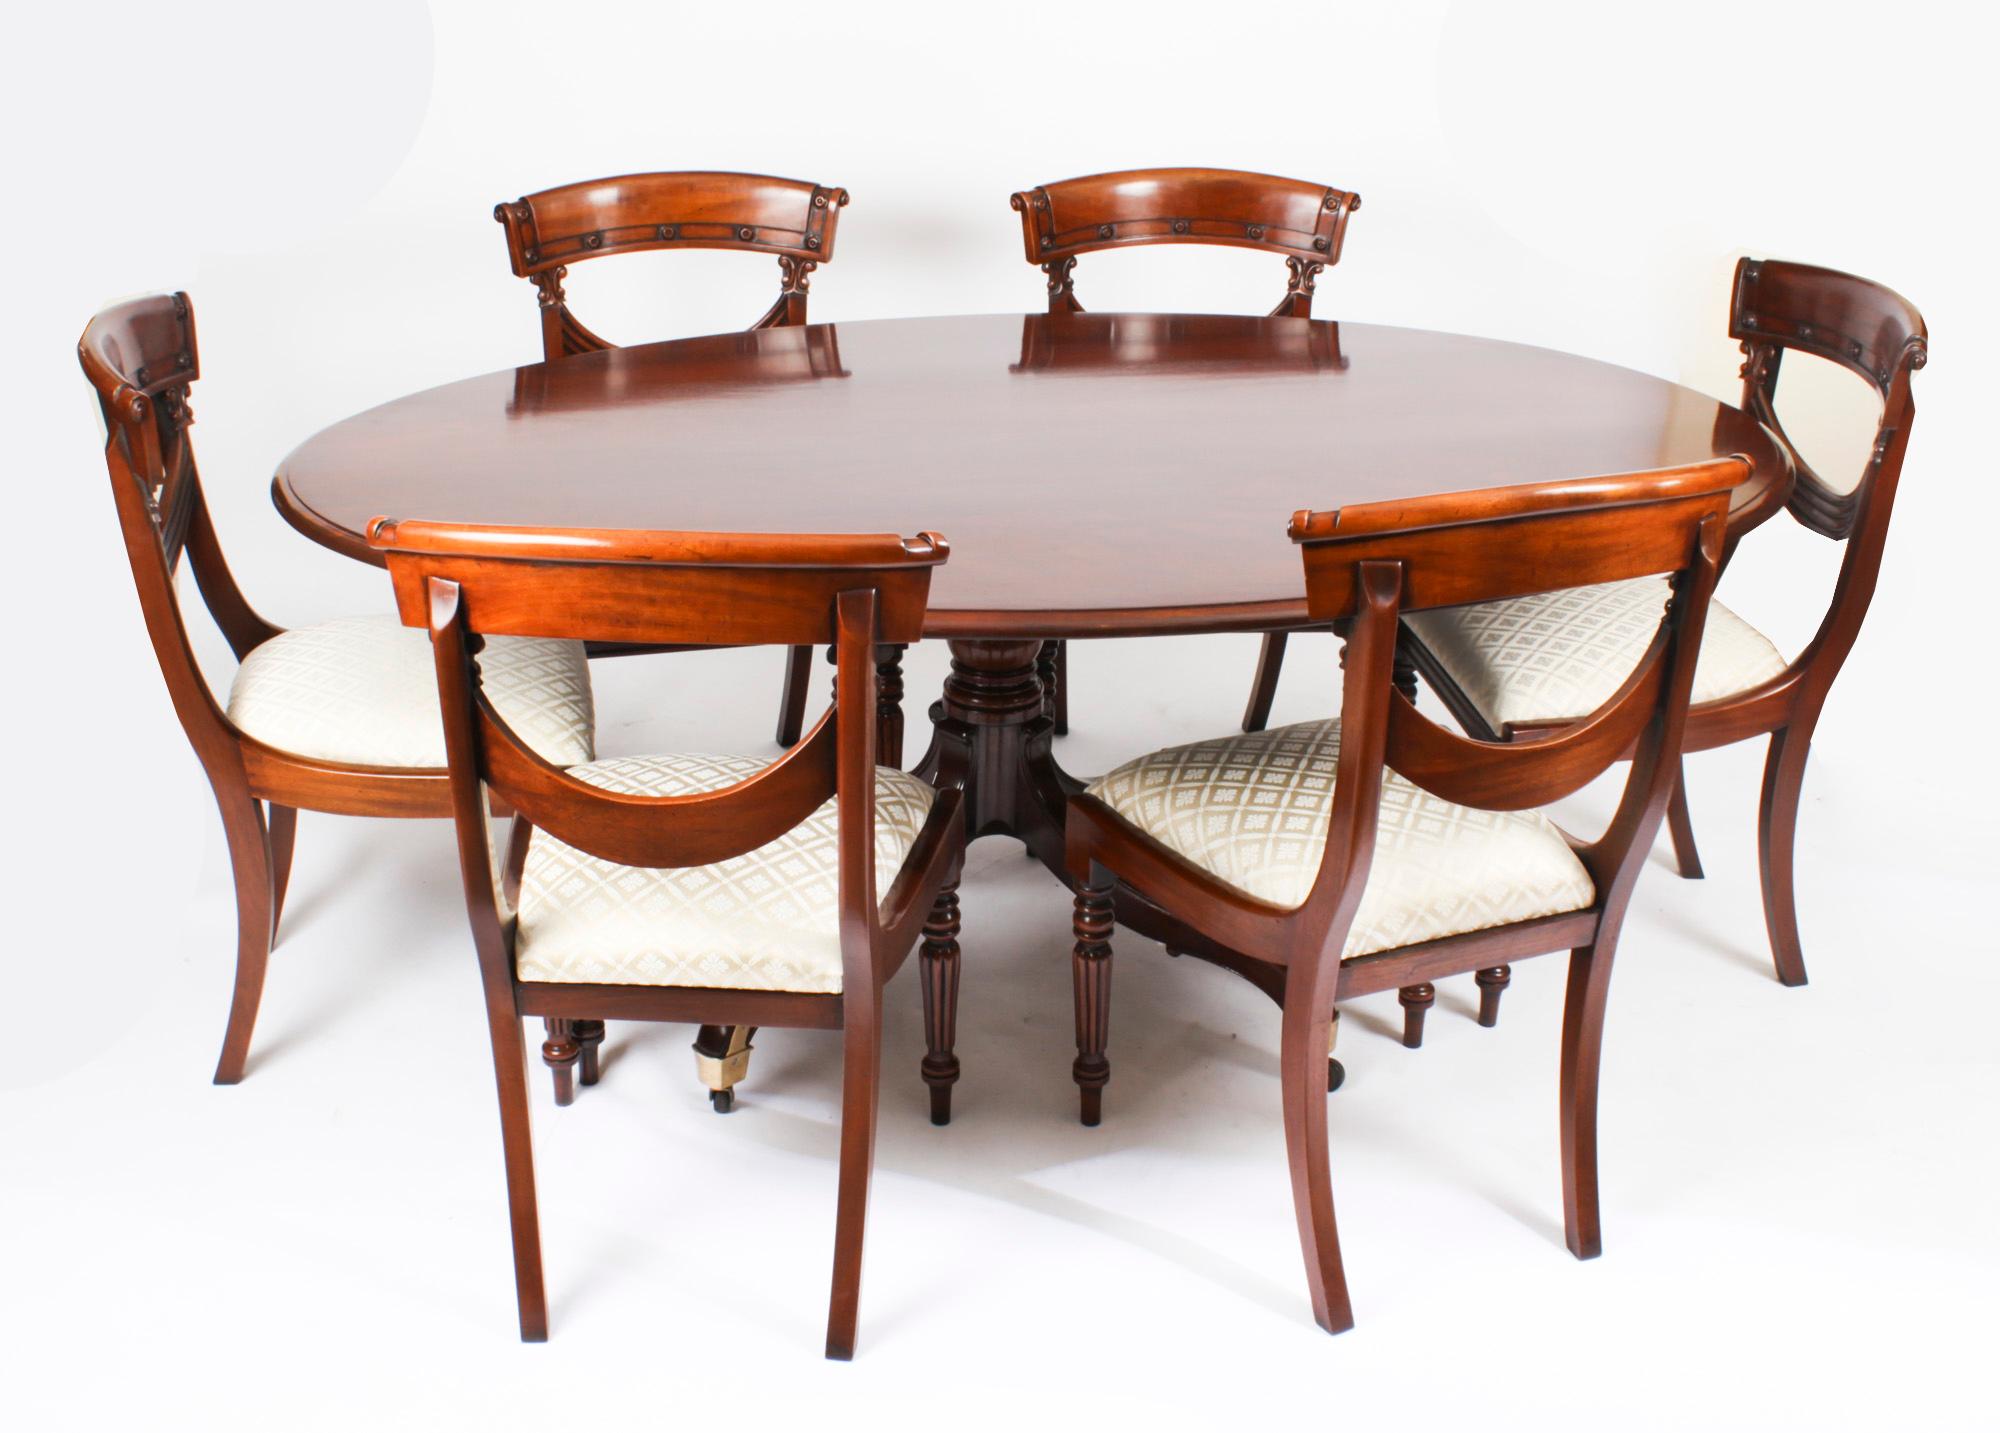 This is a superb large Irish Regency Georgian mahogany Loo / Breakfast table, circa 1830 in date.
 
THE BOTANICAL NAME FOR THE MAHOGANY THAT THIS DINING TABLE IS MADE OF IS SWIETENIA MACROPHYLLA AND THIS TYPE OF MAHOGANY IS NOT SUBJECT TO CITES